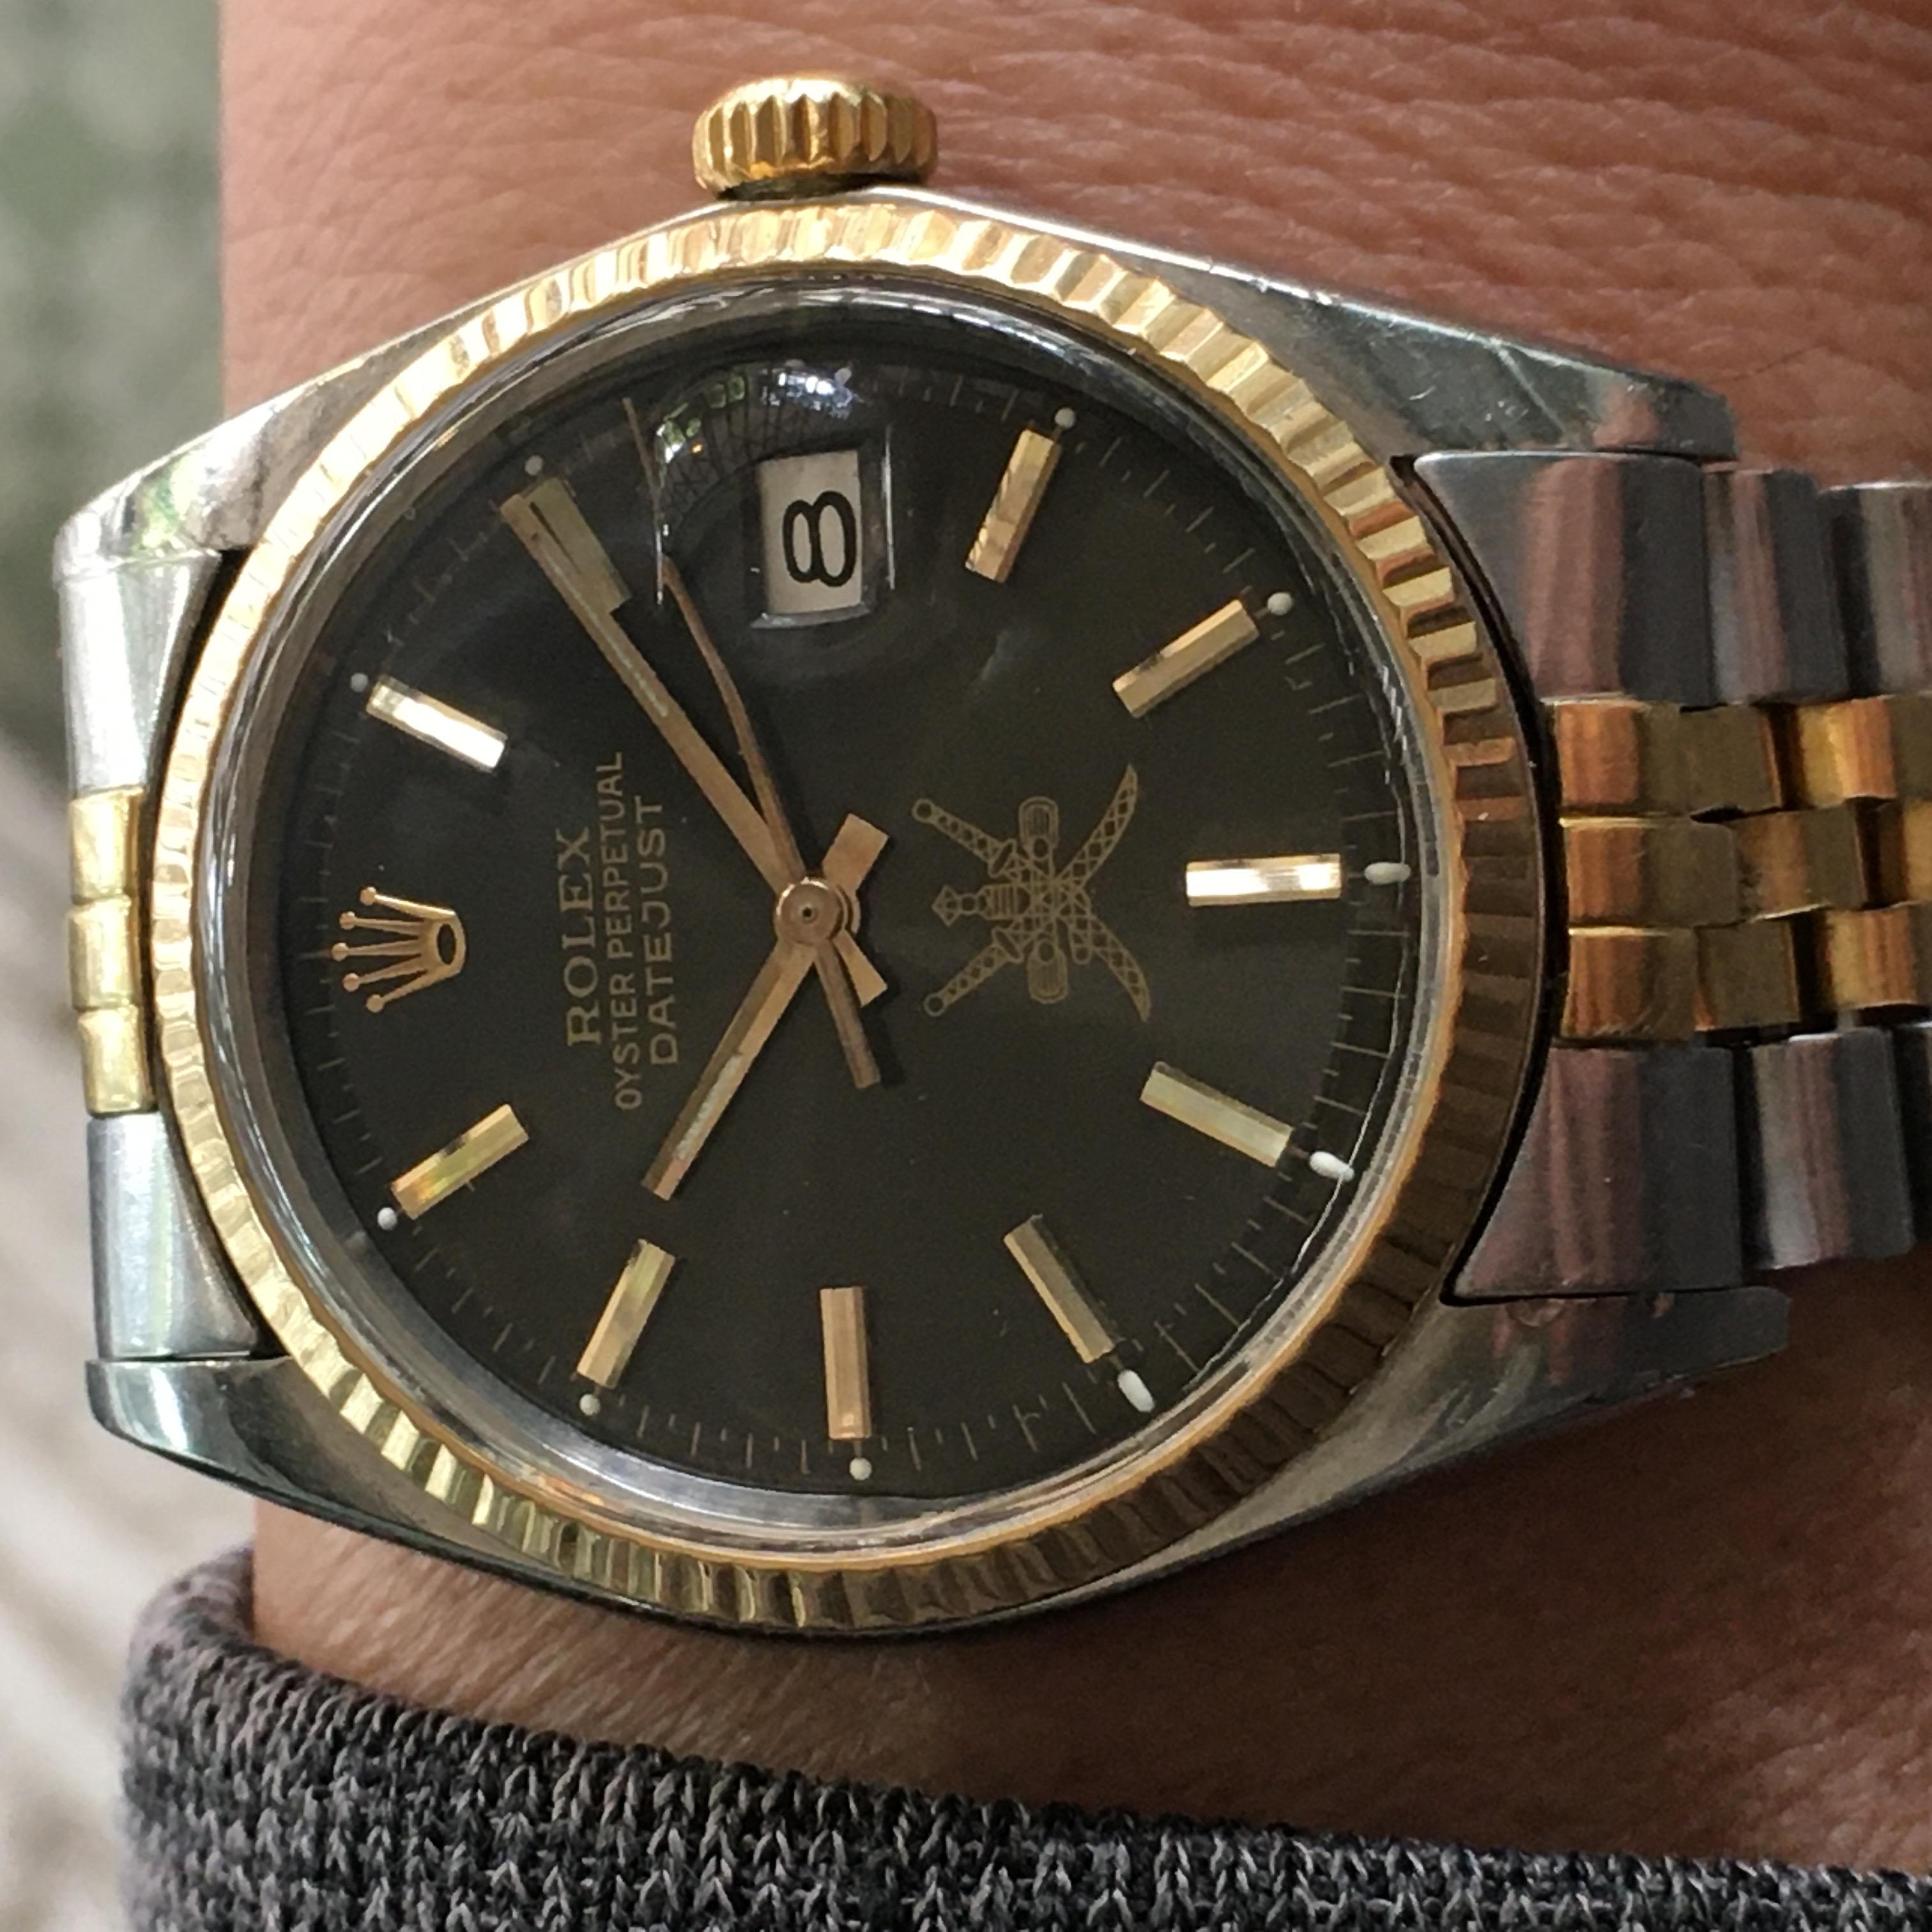 This is a vintage 1974 Rolex Datejust wristwatch for men. It features a 36mm stainless steel case with a gold fluted bezel and a Khanjar black dial with multiple hands and a 12-hour dial. The watch has a stainless steel and 18K gold bracelet/link